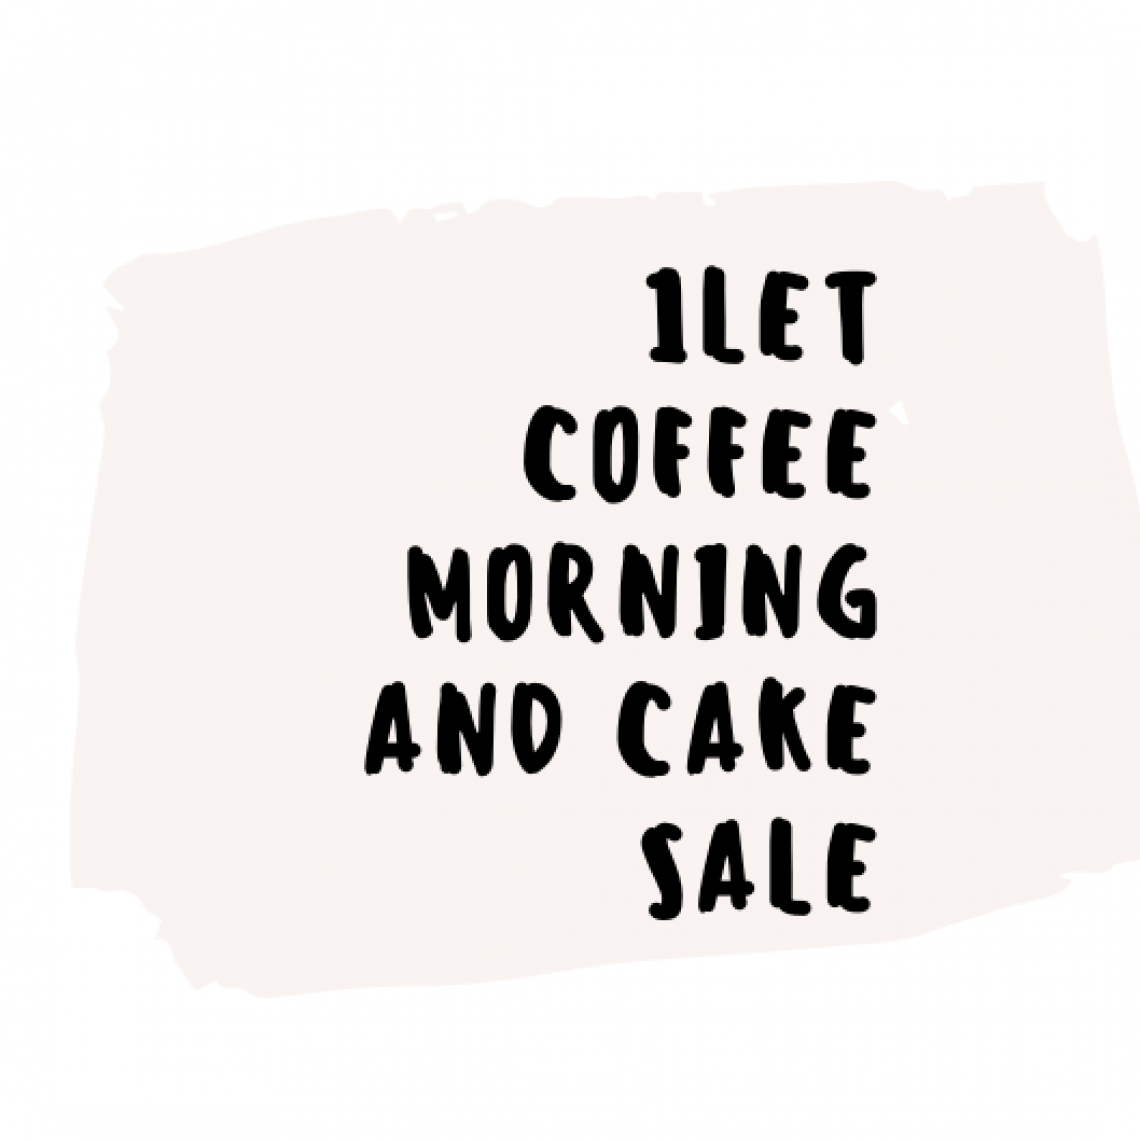 1LET Coffee and Cake Morning